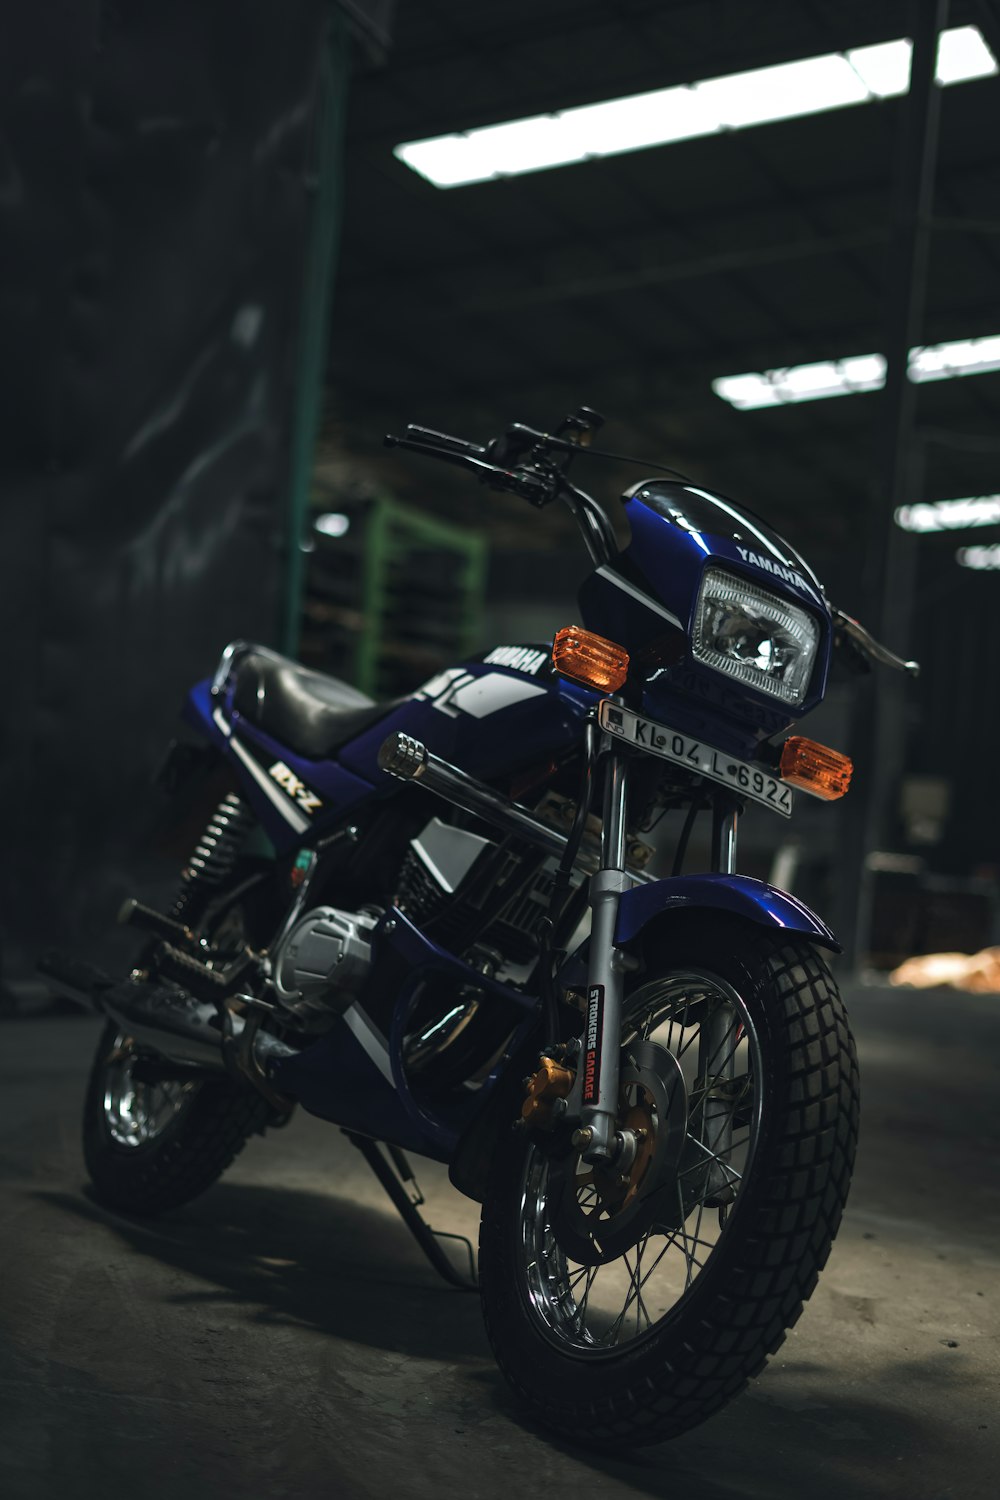 A motorcycle parked in a garage photo – Free Rx 100 Image on Unsplash